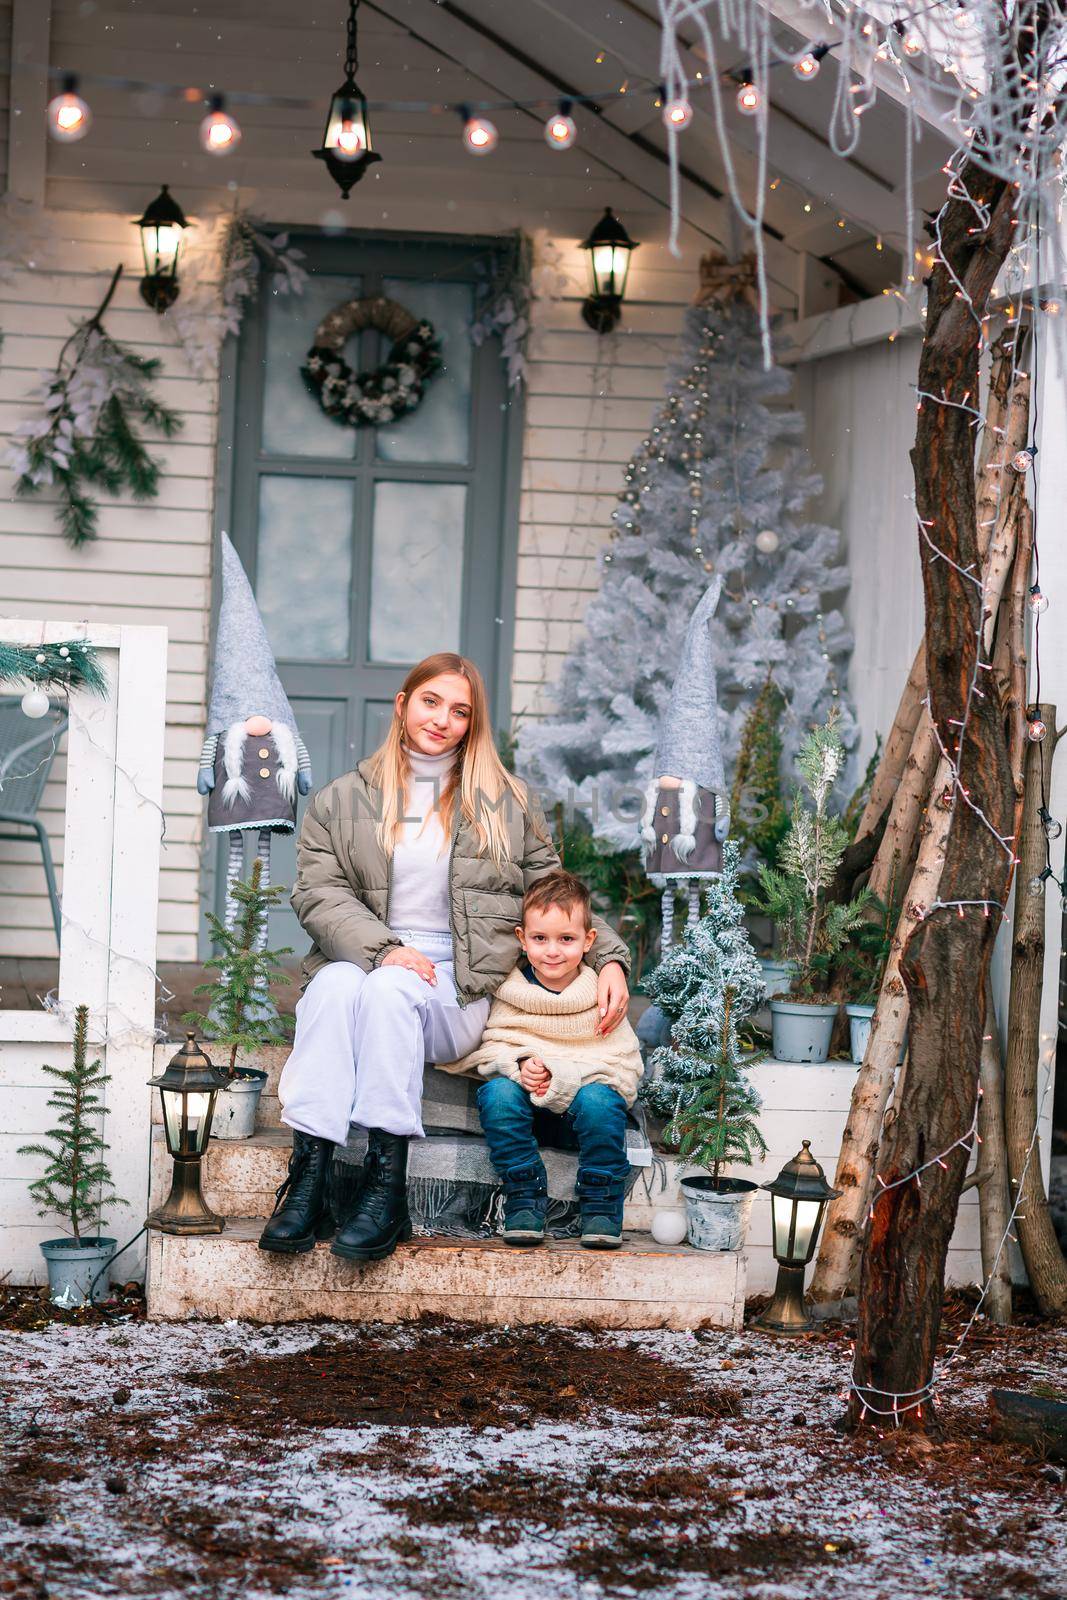 Happy little kids with white little puppy sitting on the porch of the Christmas decorated house, snowing outdoor. Happy New Year and Merry Christmas. Magic winter